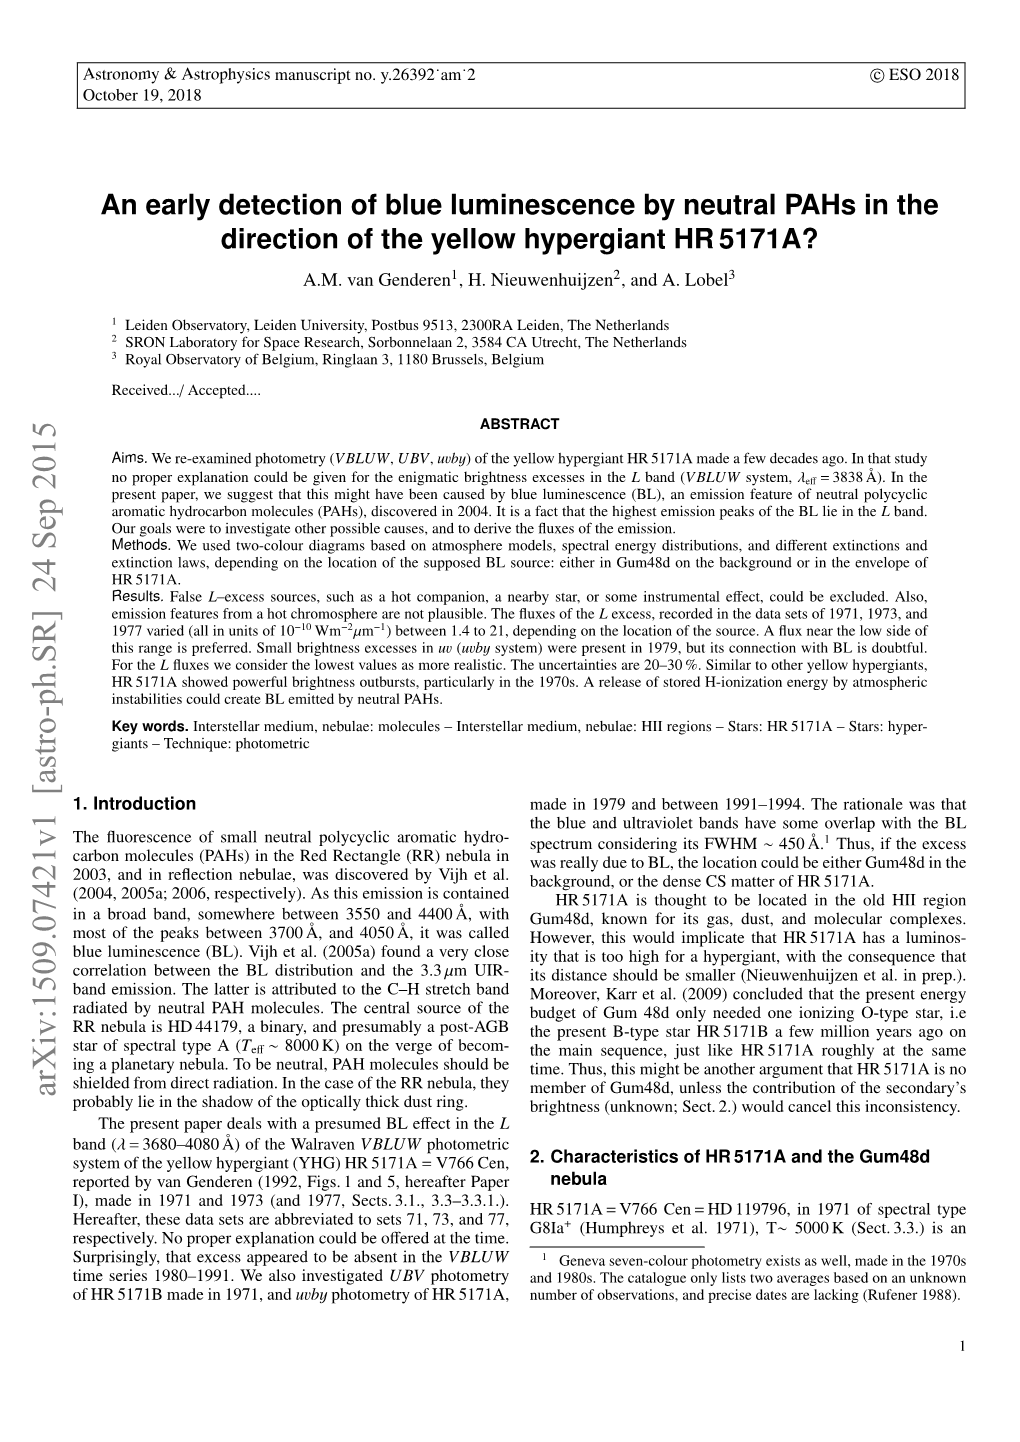 An Early Detection of Blue Luminescence by Neutral Pahs in the Direction of the Yellow Hypergiant HR 5171A? A.M